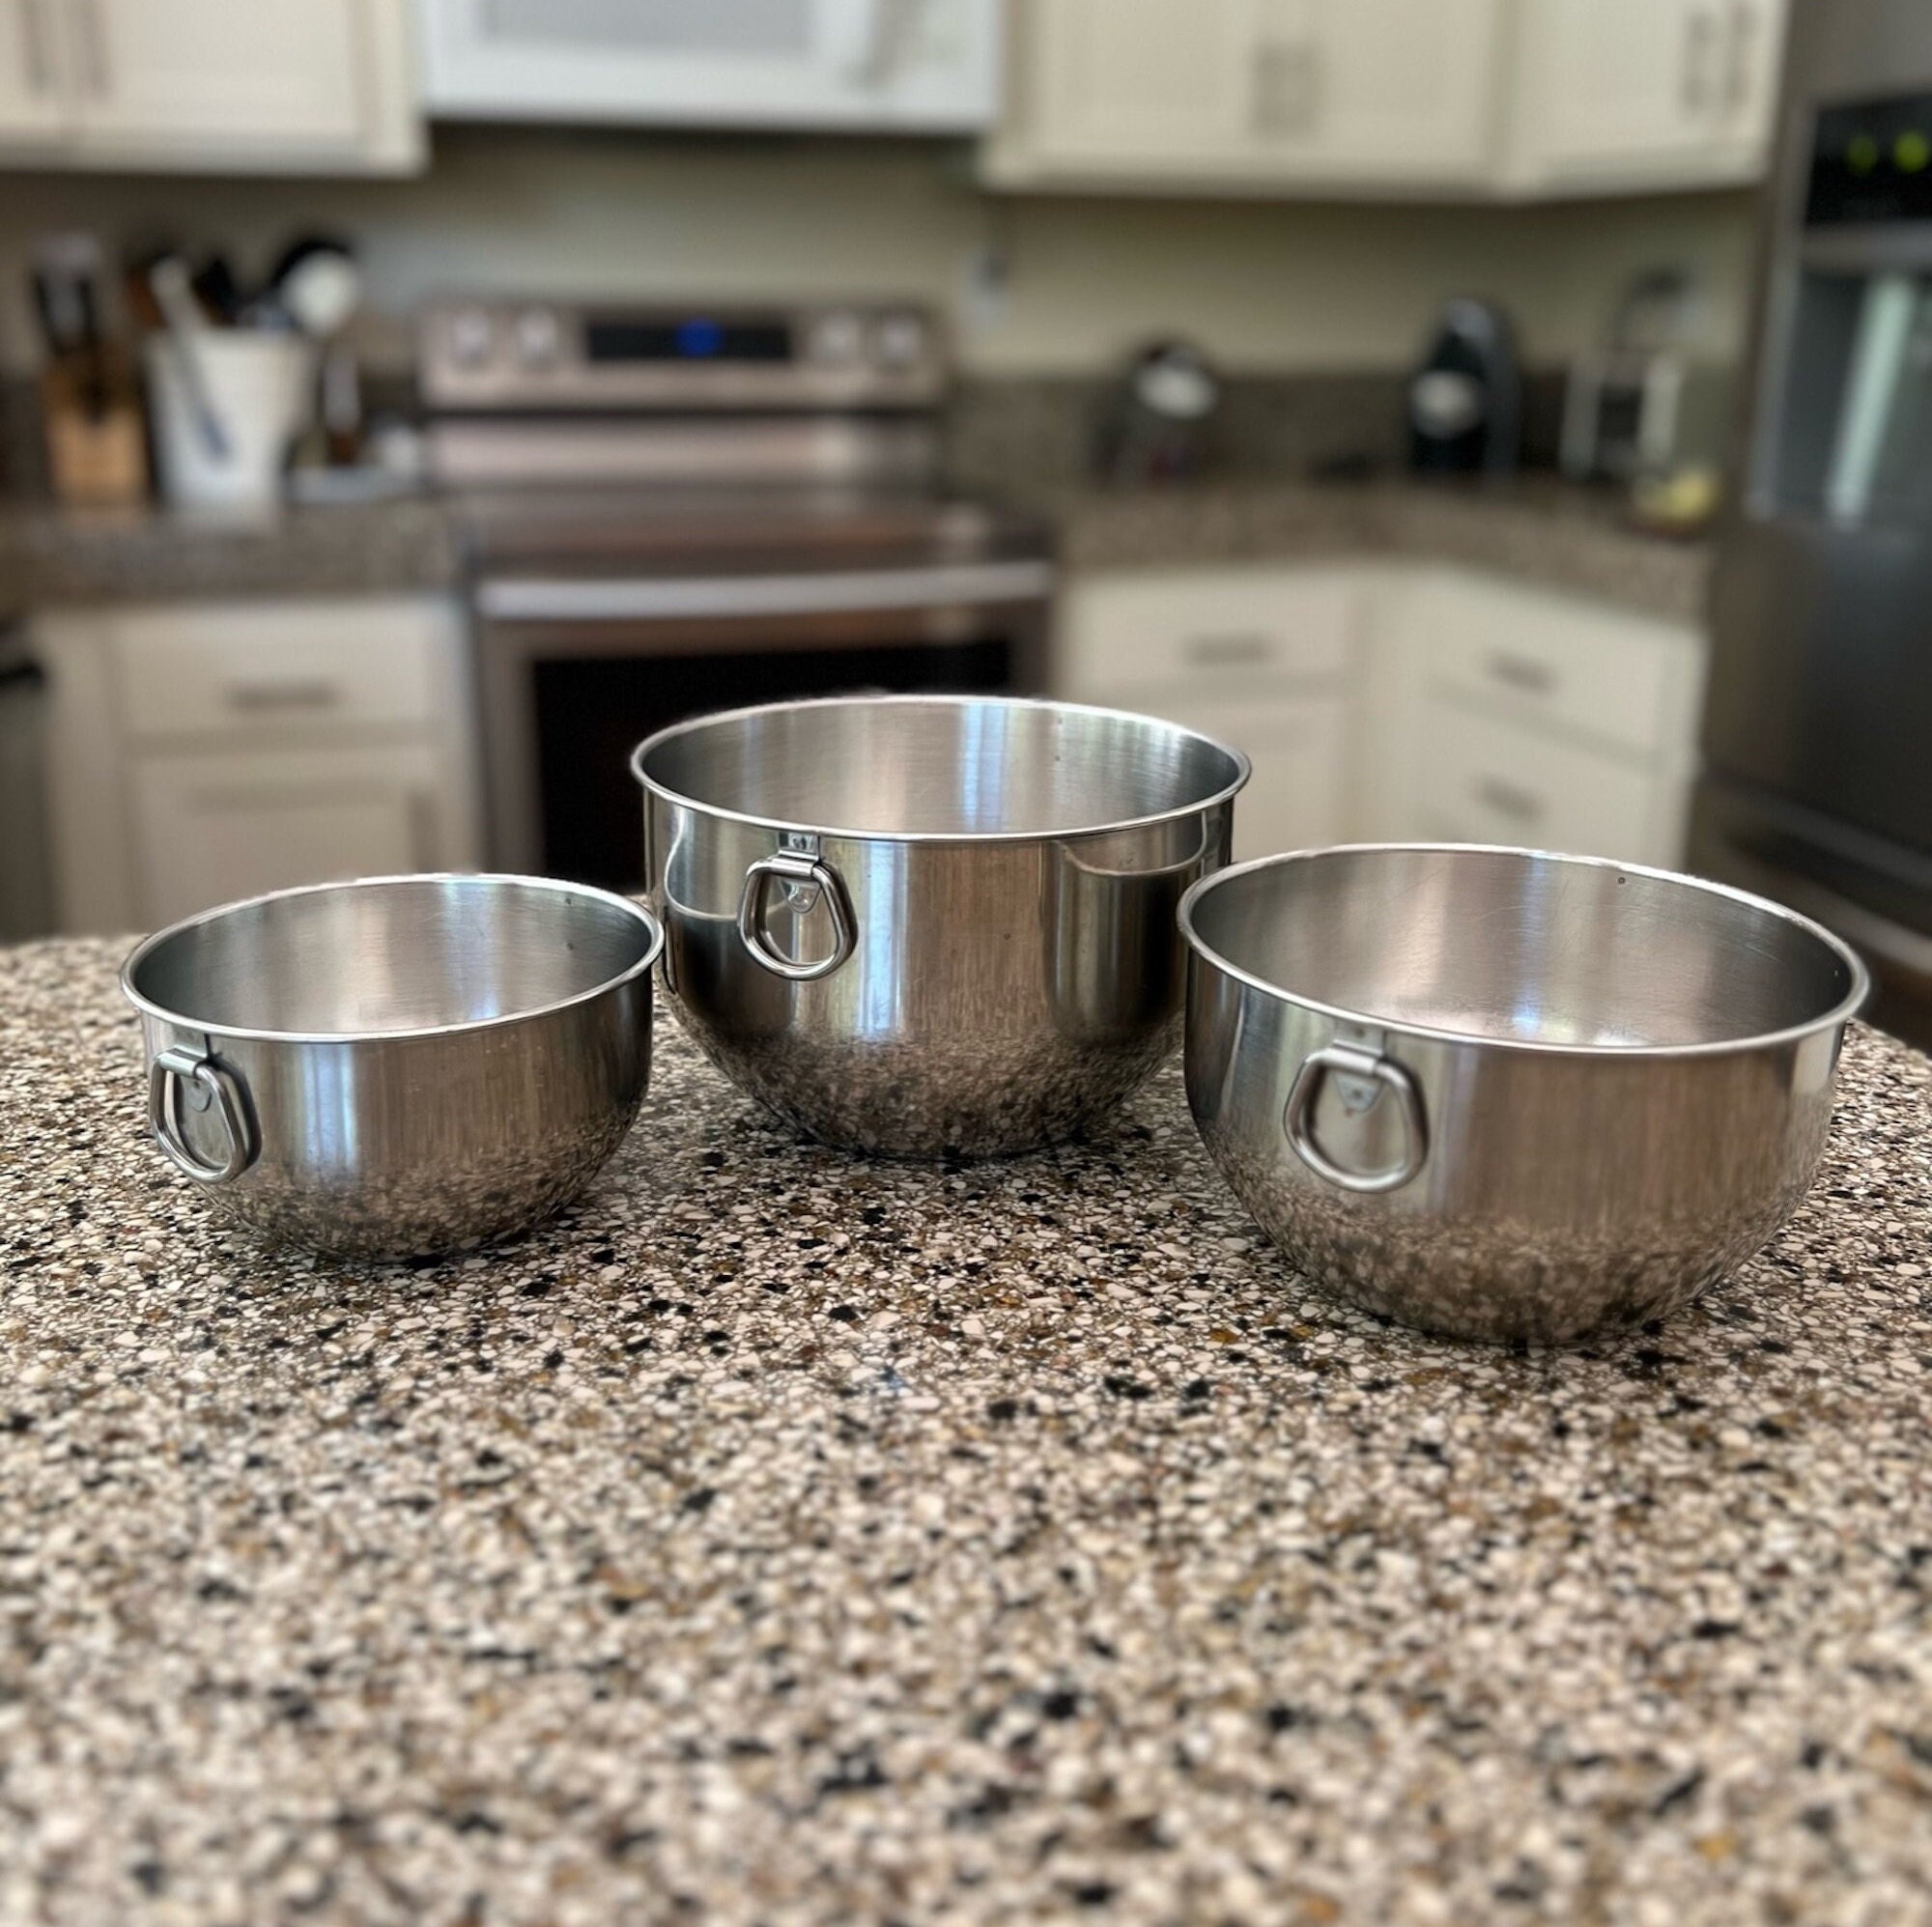 Set of 3 Double-ring Grip Stainless Steel Nesting Mixing Bowls by Farberware  Farberware Bowls Stainless Mixing Bowls Vintage Baking 